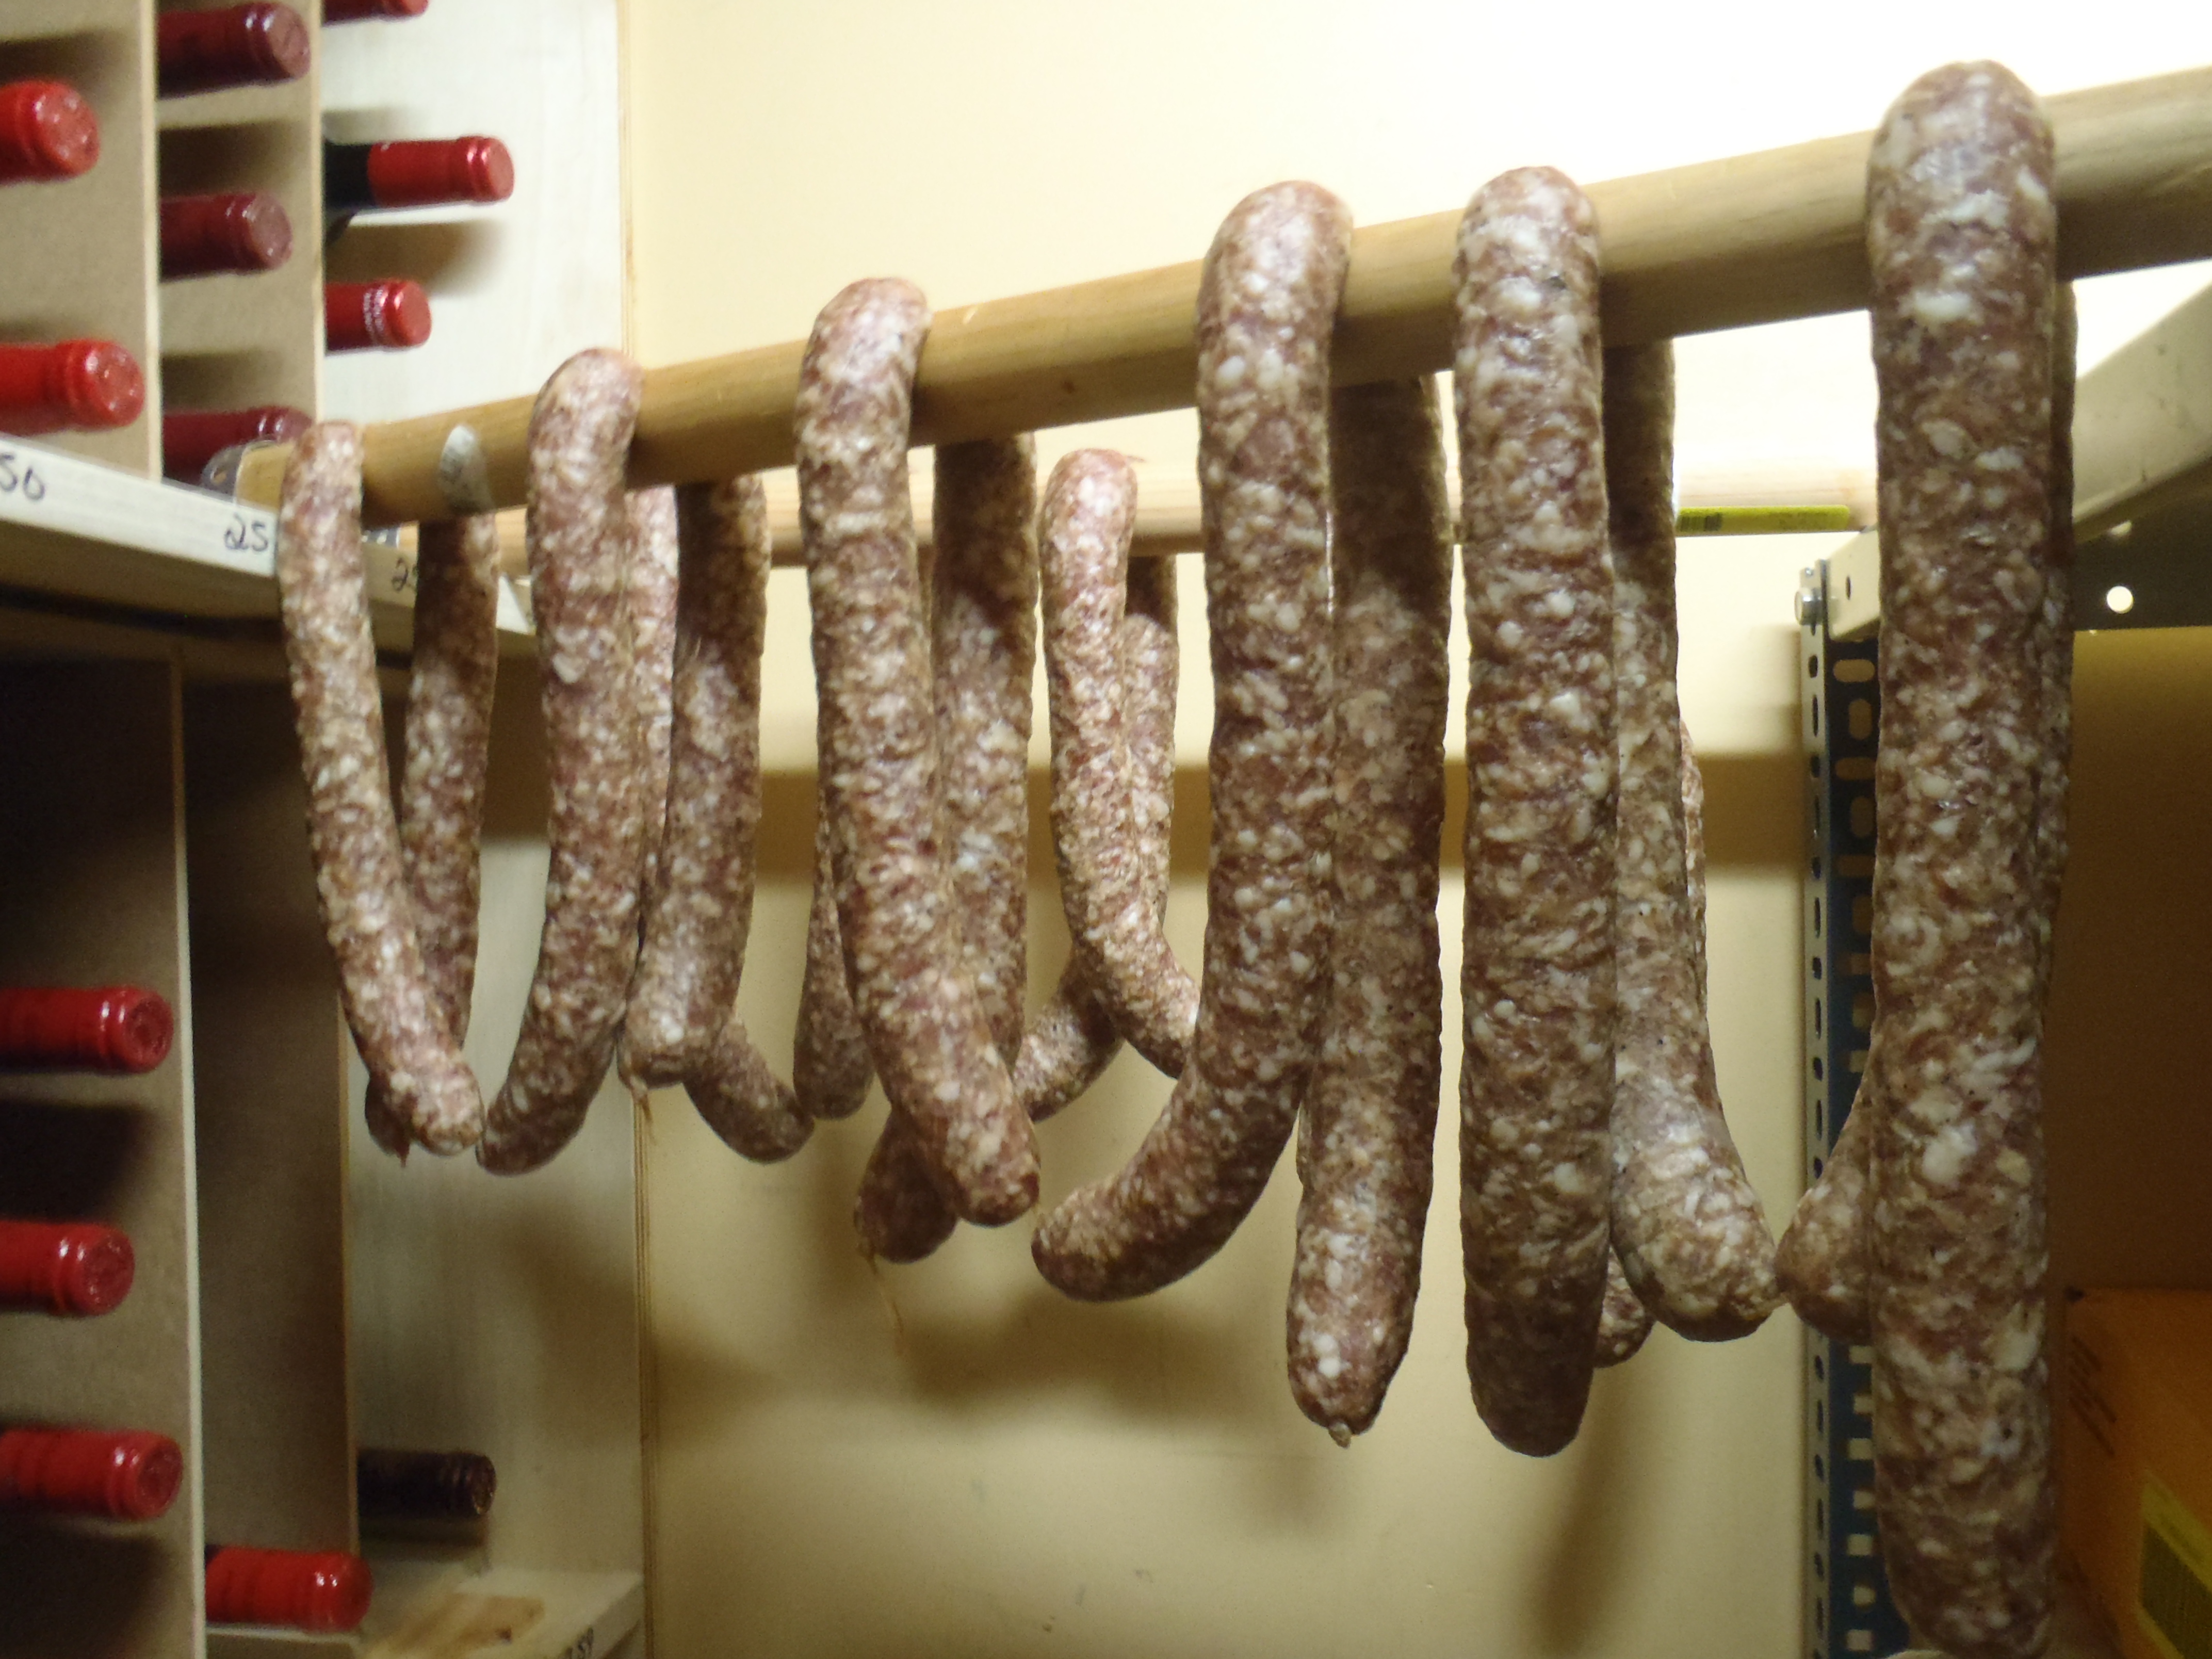 Hanging sausages to dry in a cellar